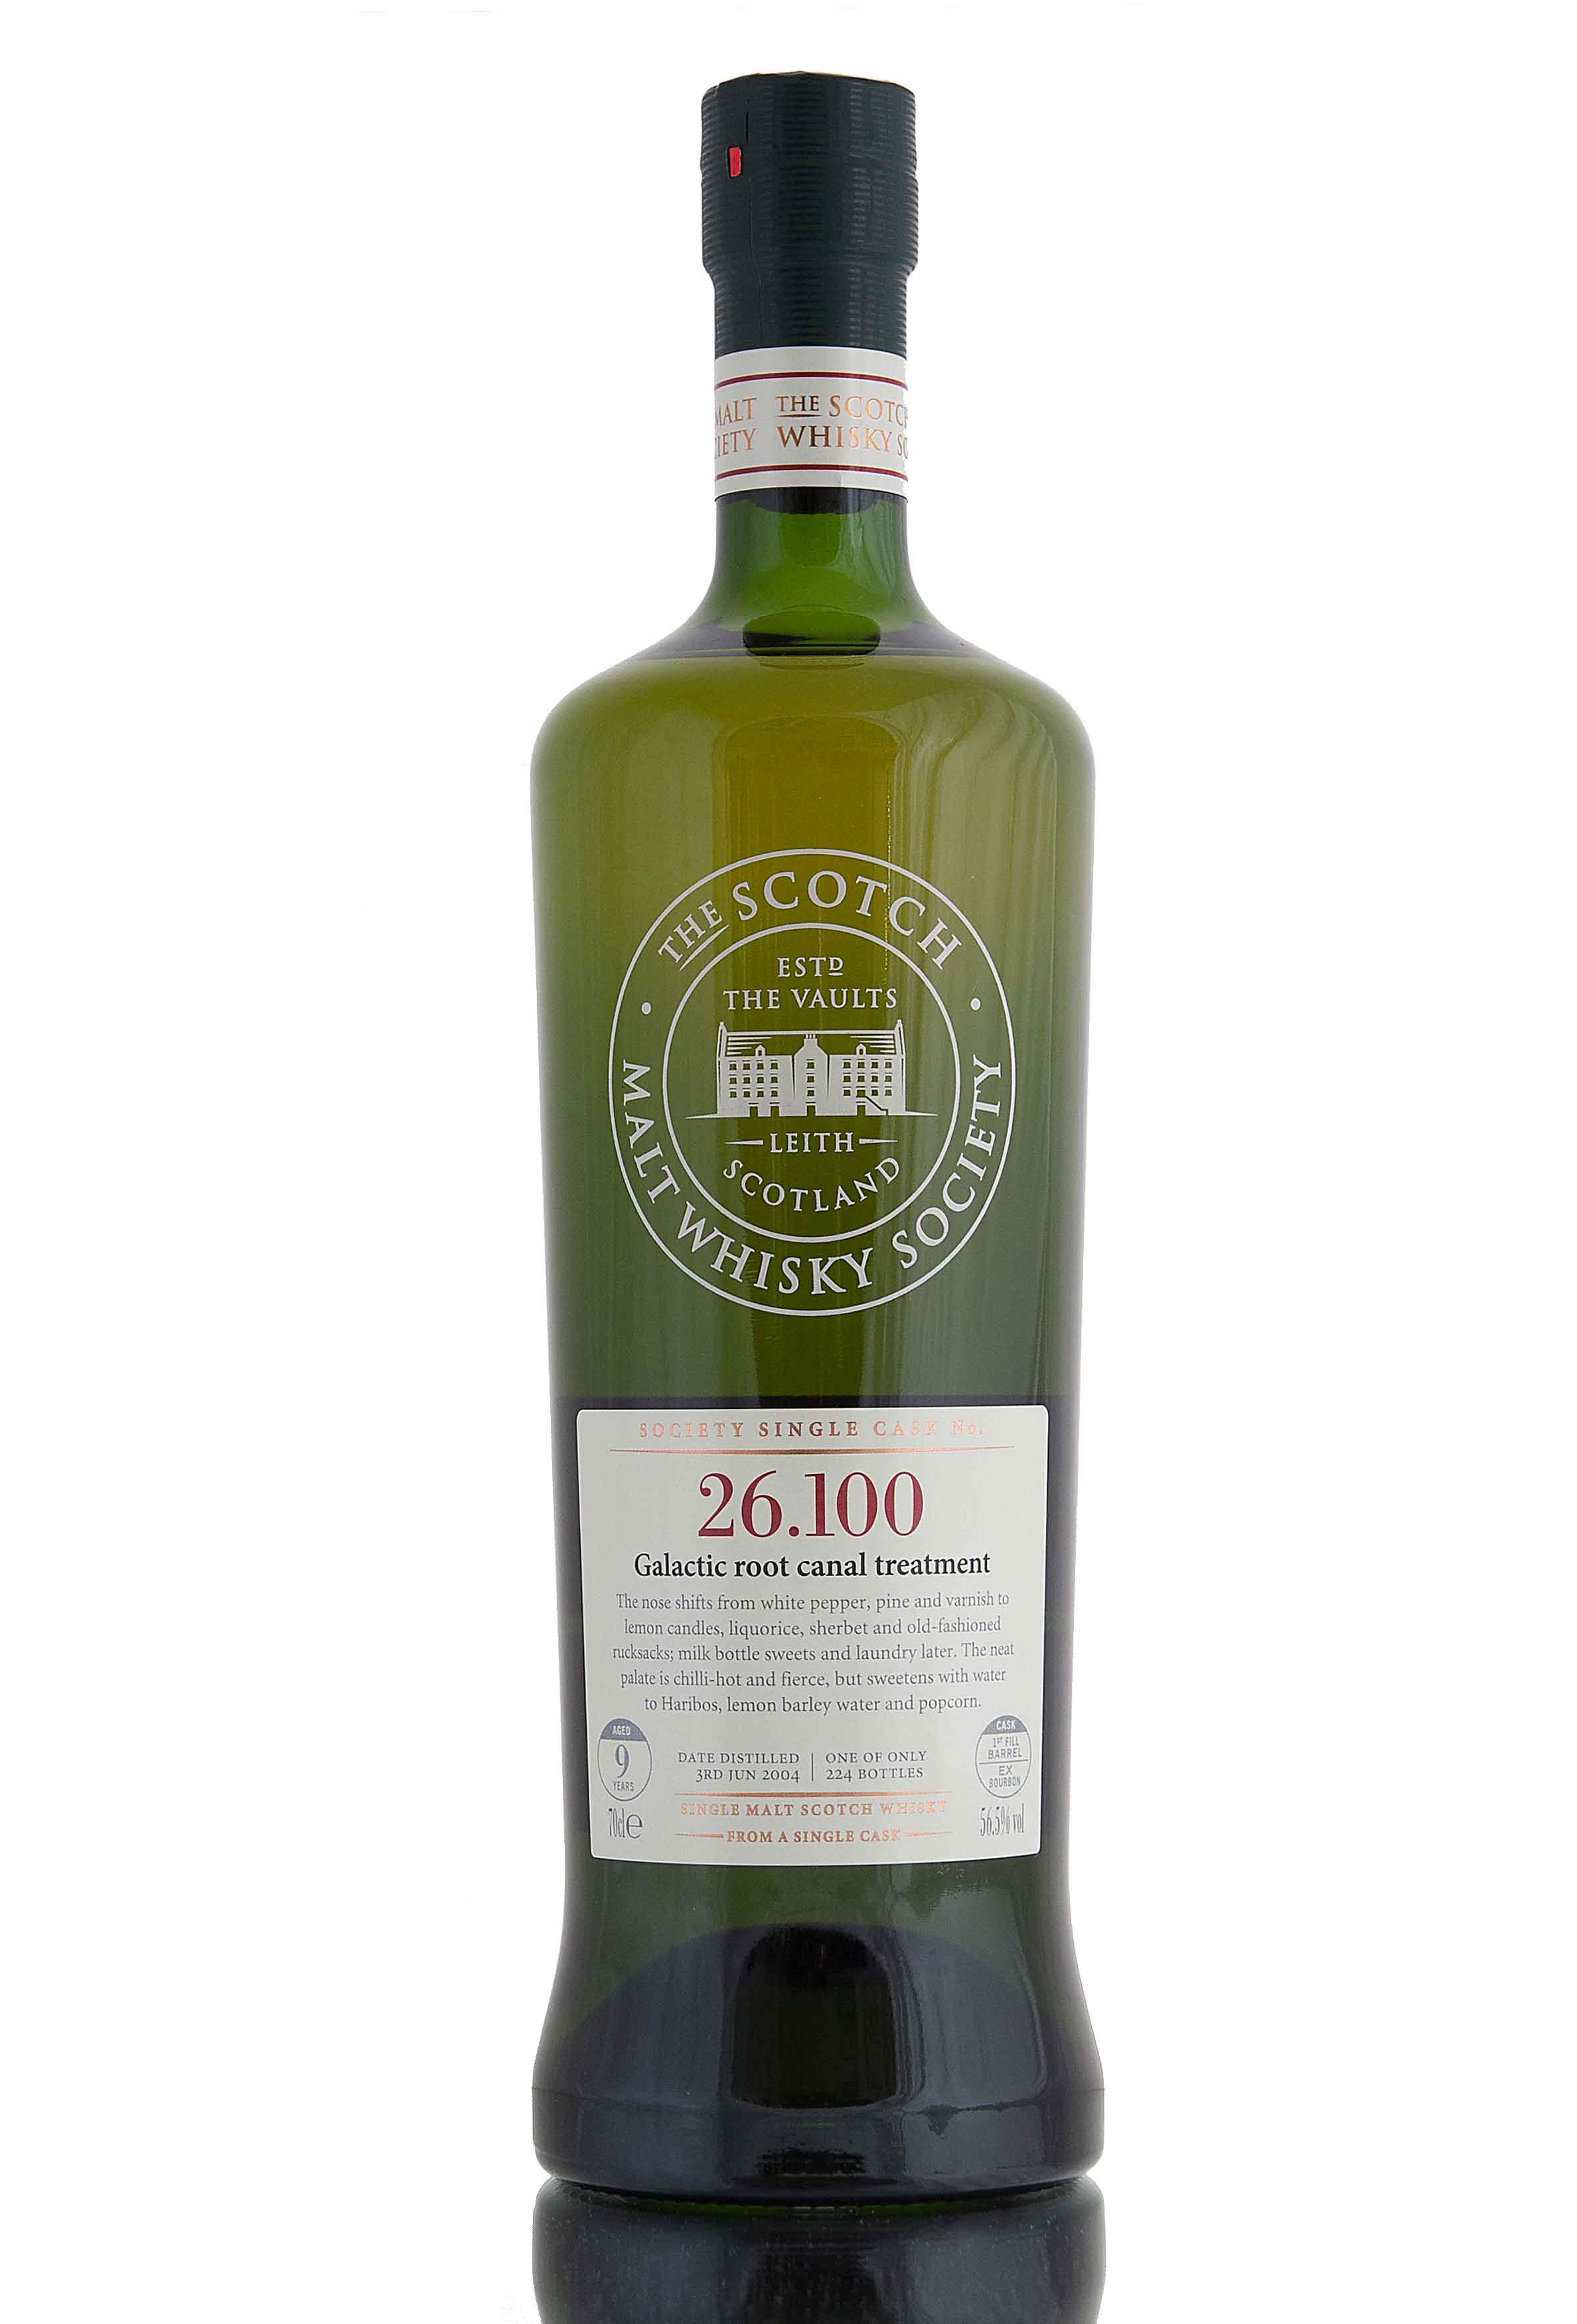 Clynelish 2004 / 9 Year Old / SMWS 26.100